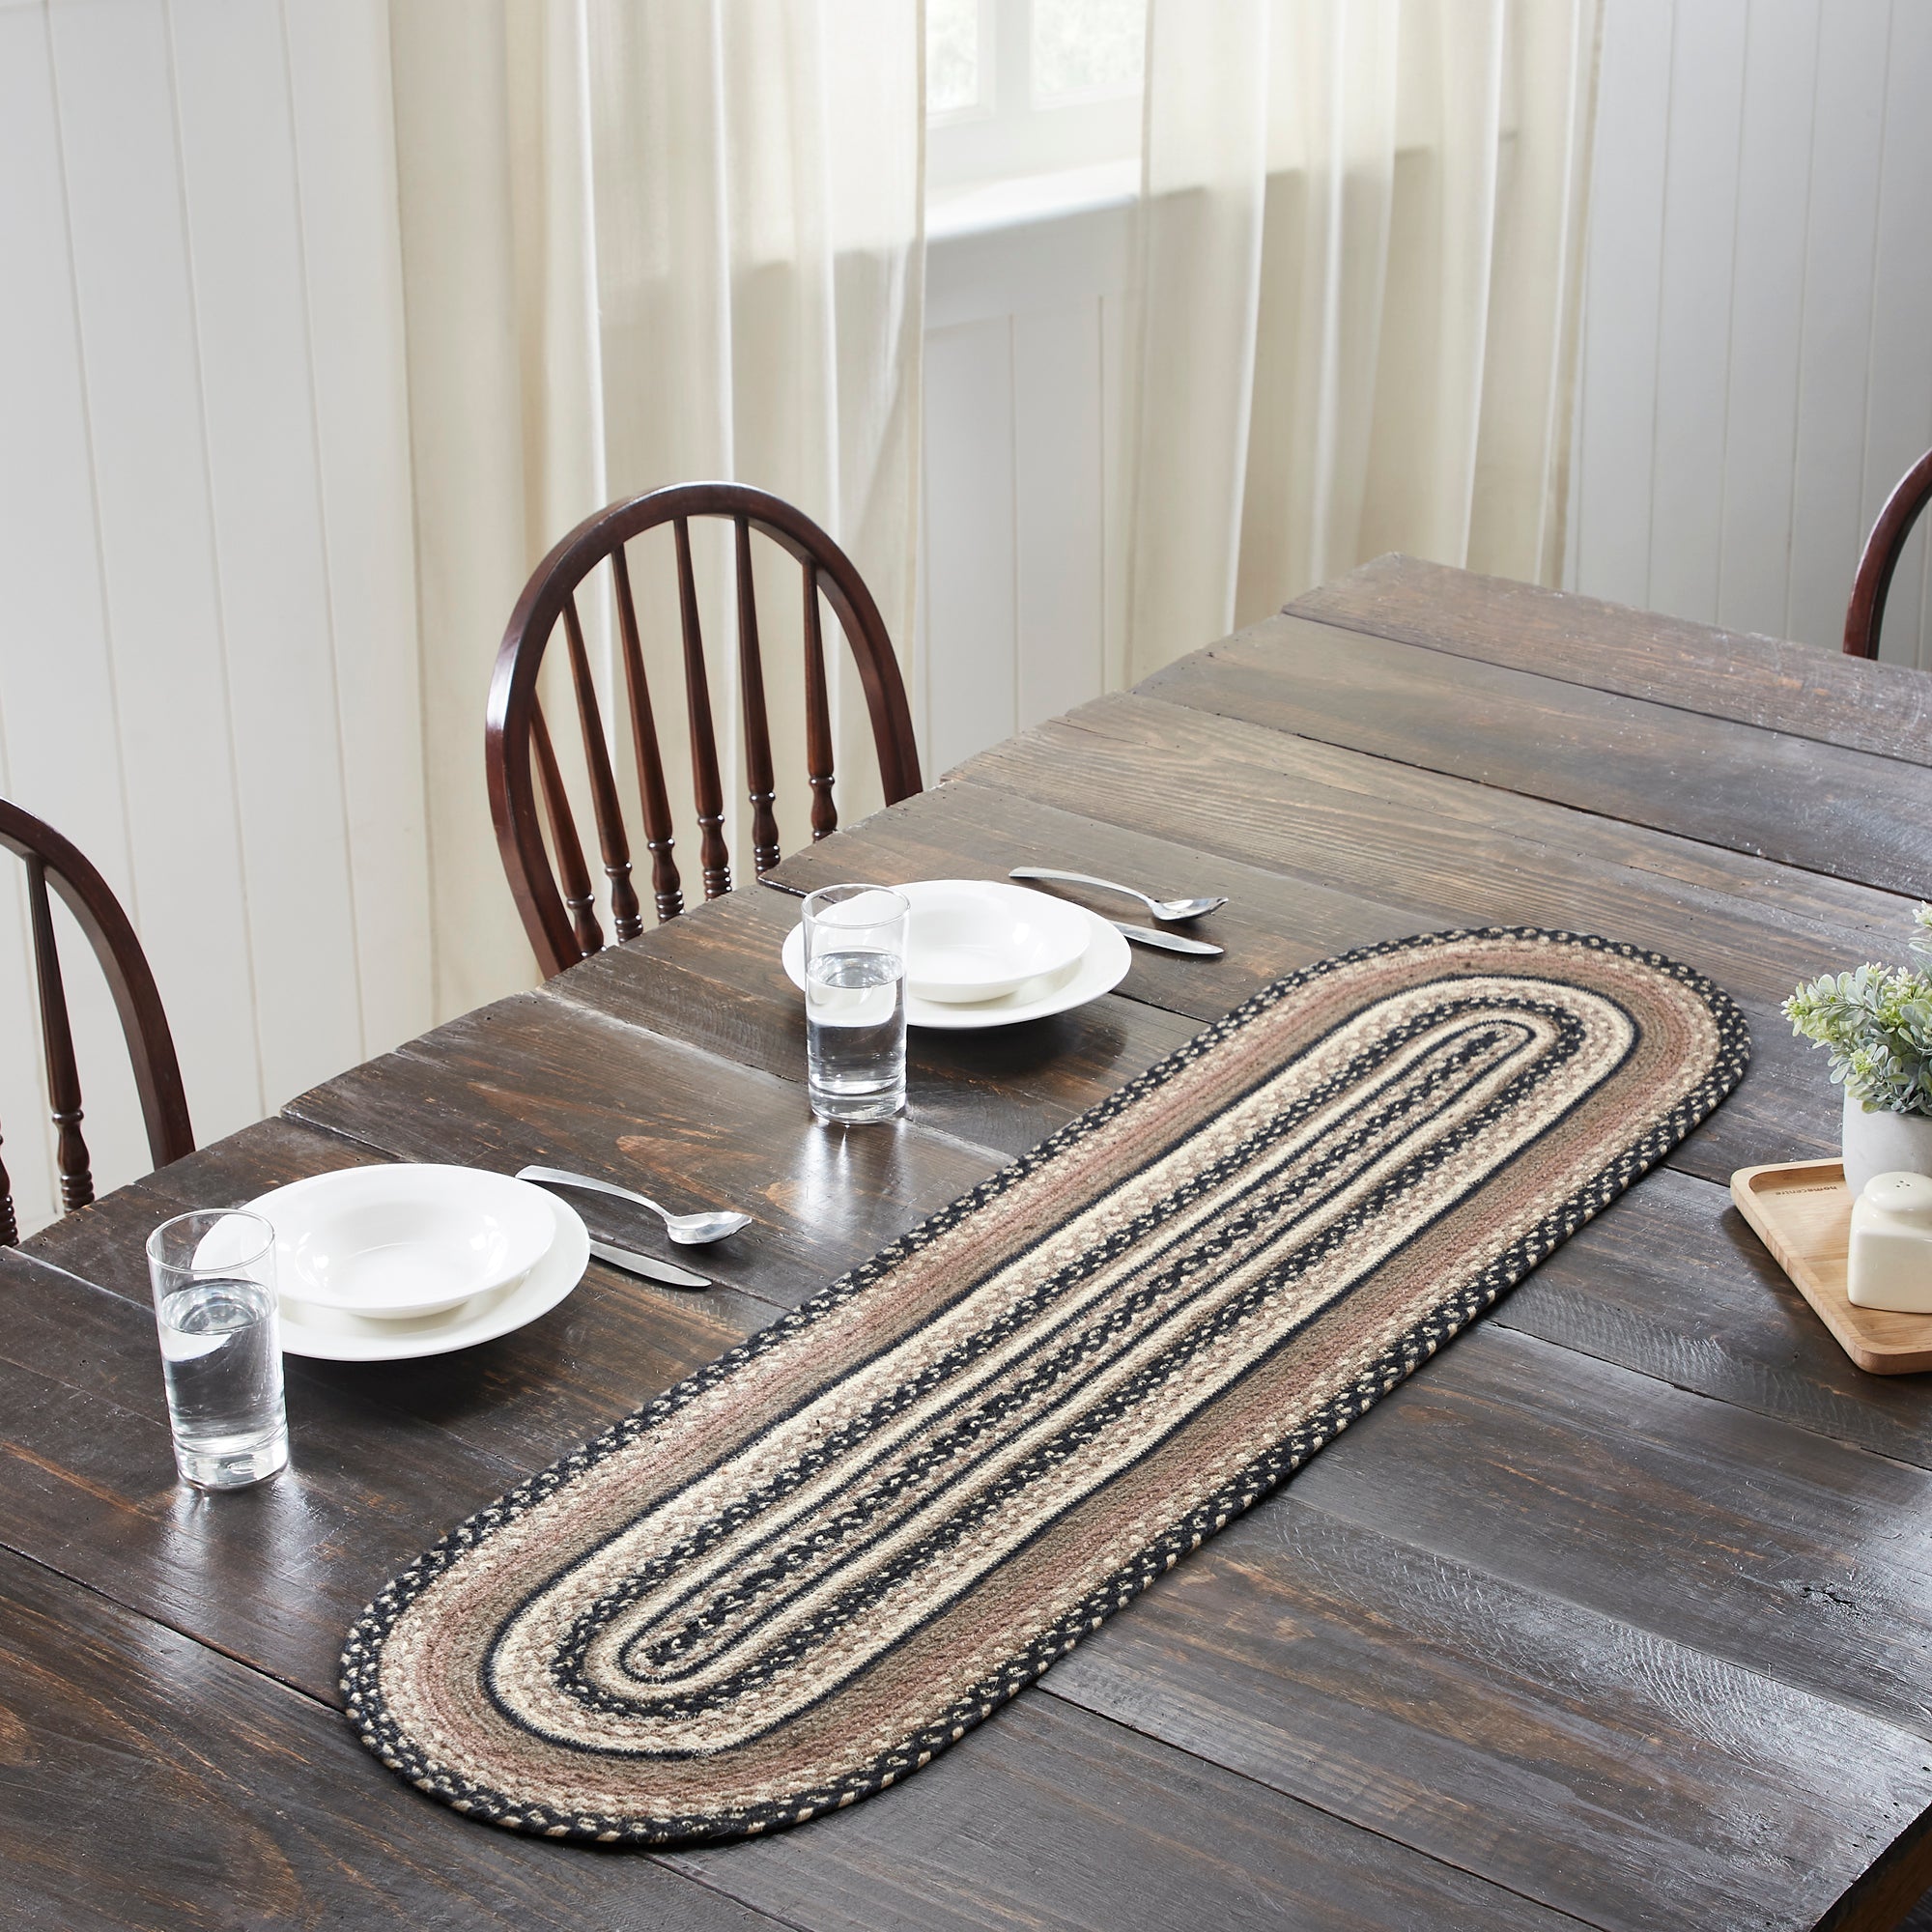 Sawyer Mill Charcoal Creme Jute Braided Oval Table Runner 13"x48" VHC Brands